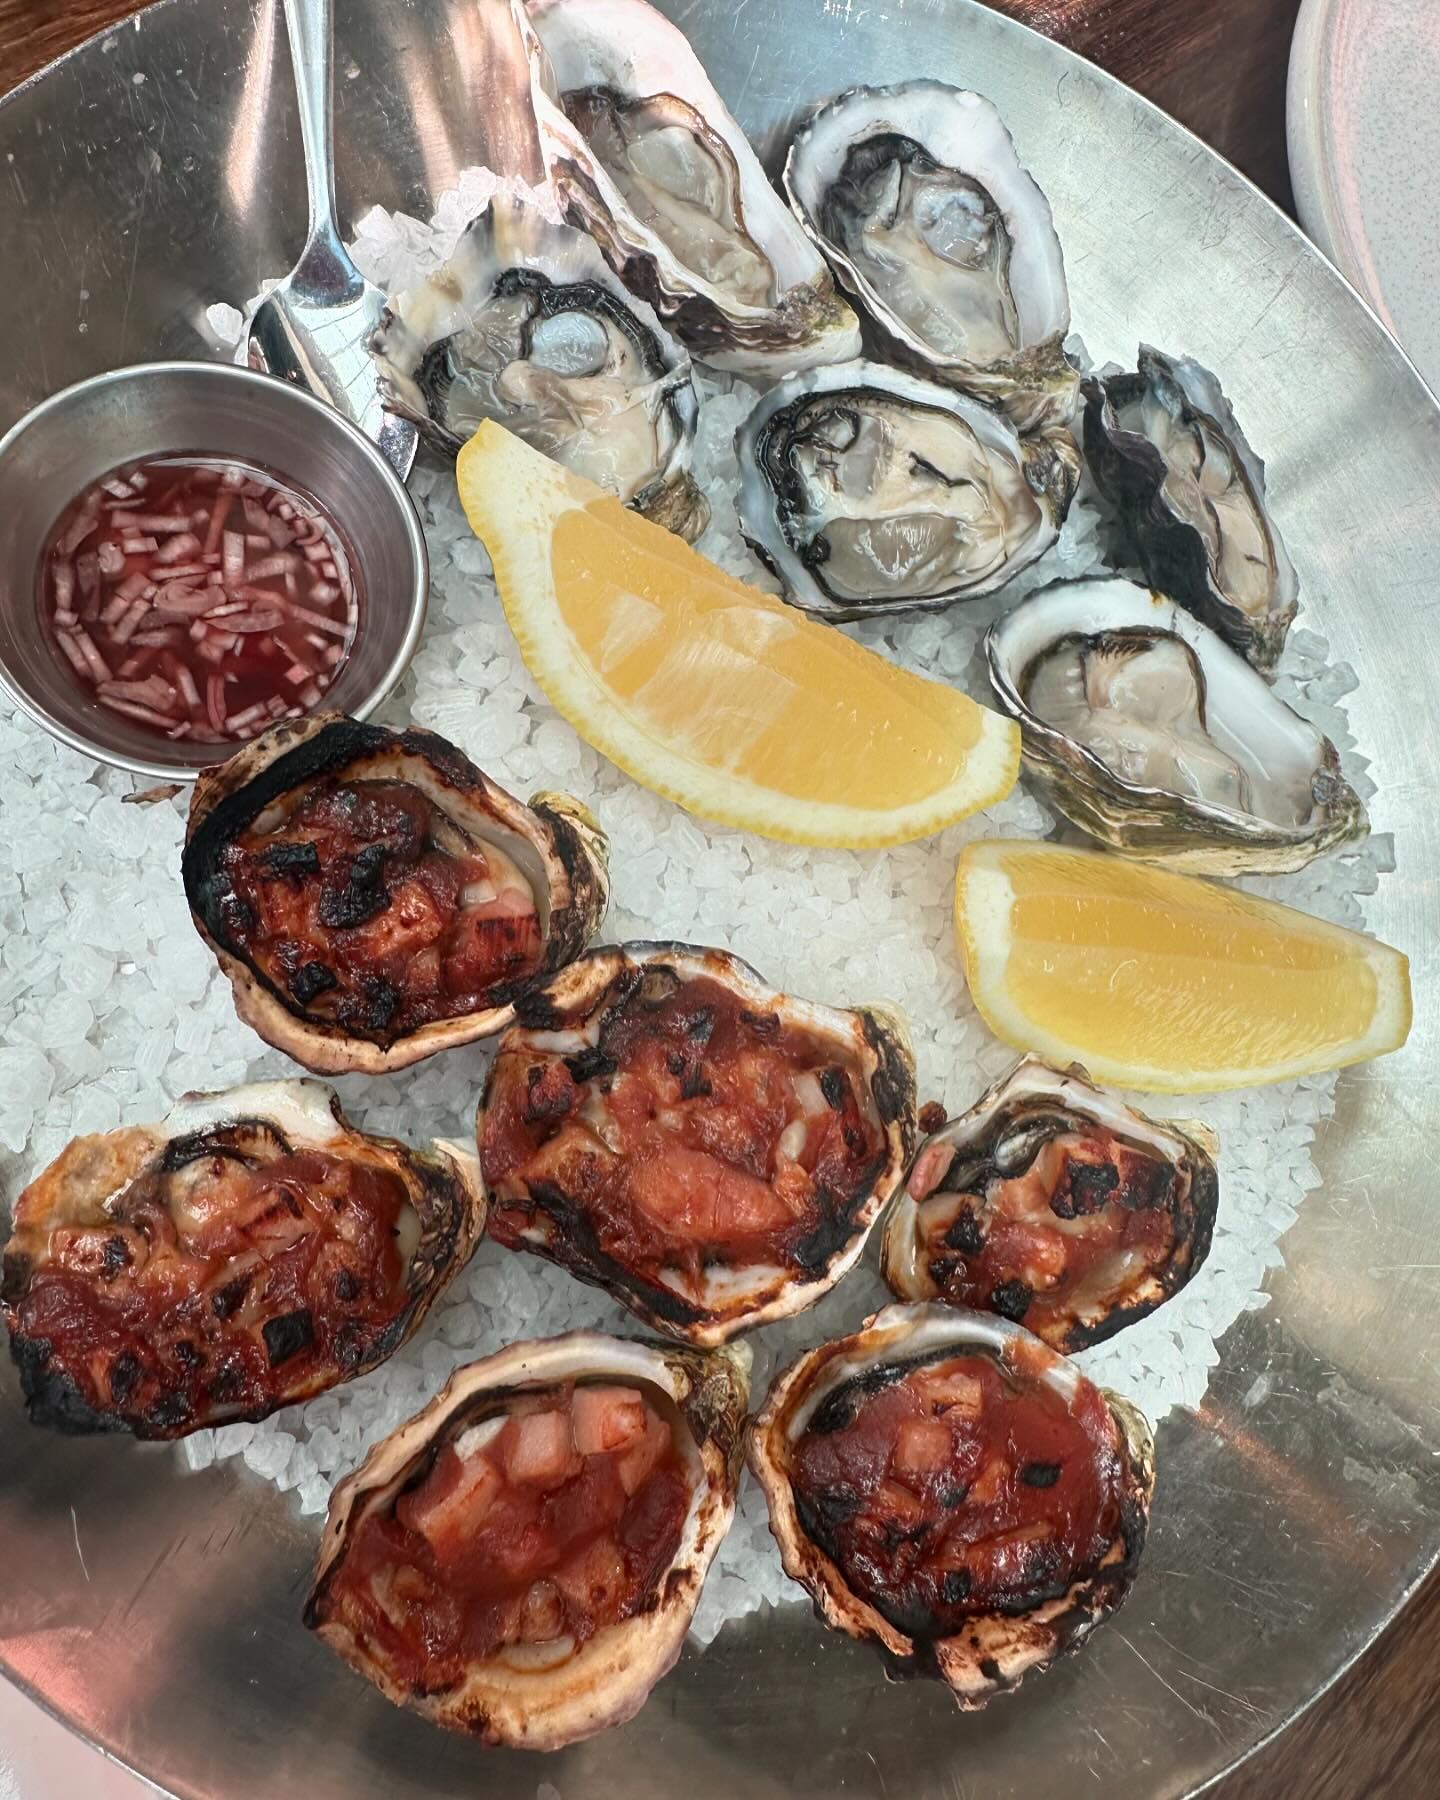 -
Can eat an oyster 🦪 
-
#oysters #melbourne #crown #casino